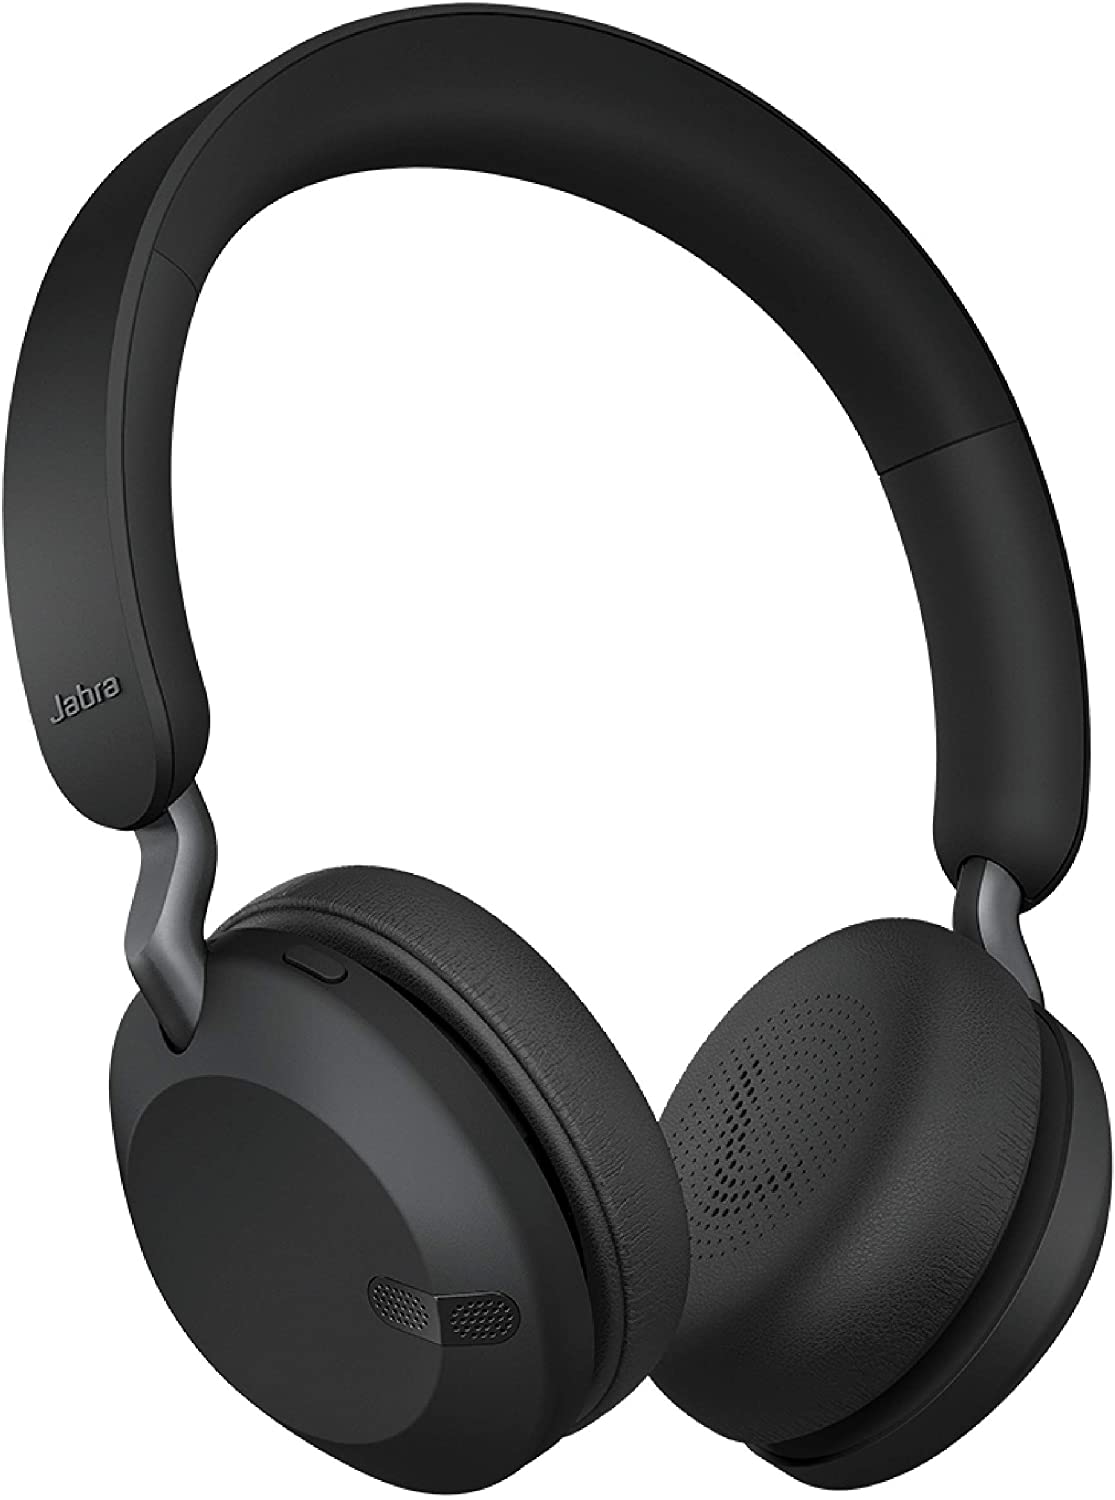 Take up to $100 off on these excellent Jabra headphones for Cyber Monday 5